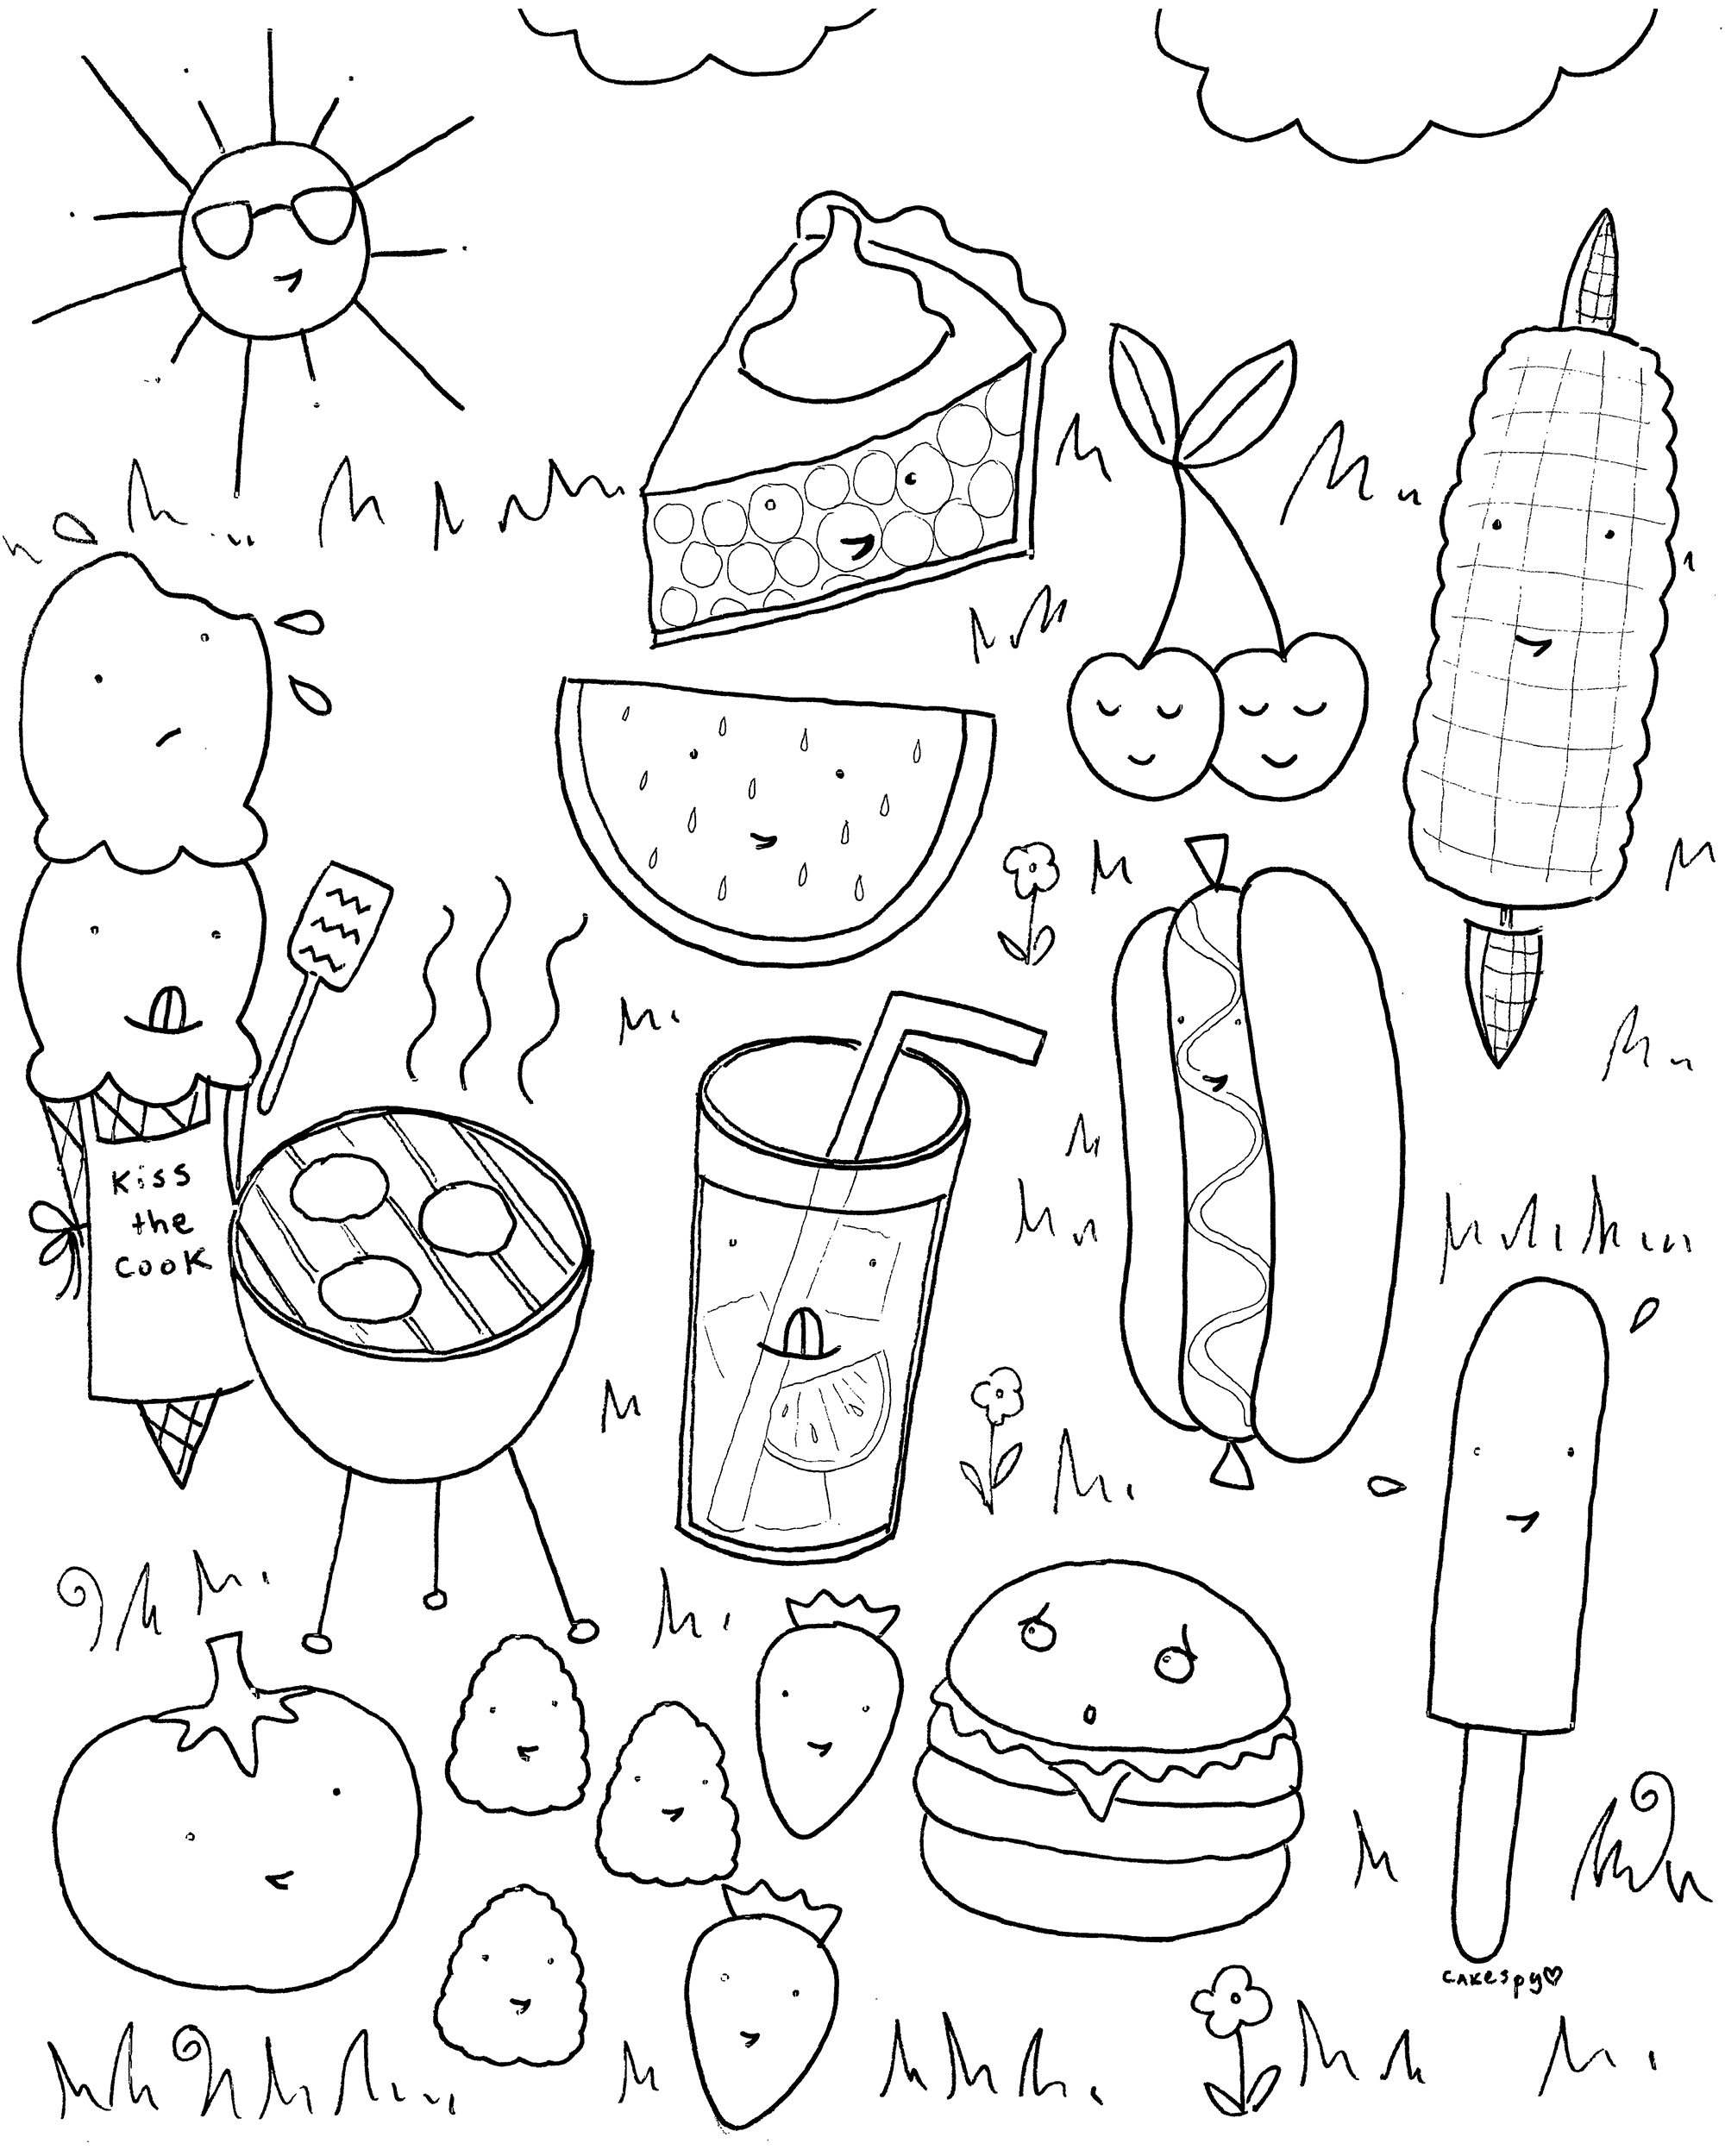 Download Free Downloadable Summer Fun Coloring Book Pages Craftsy